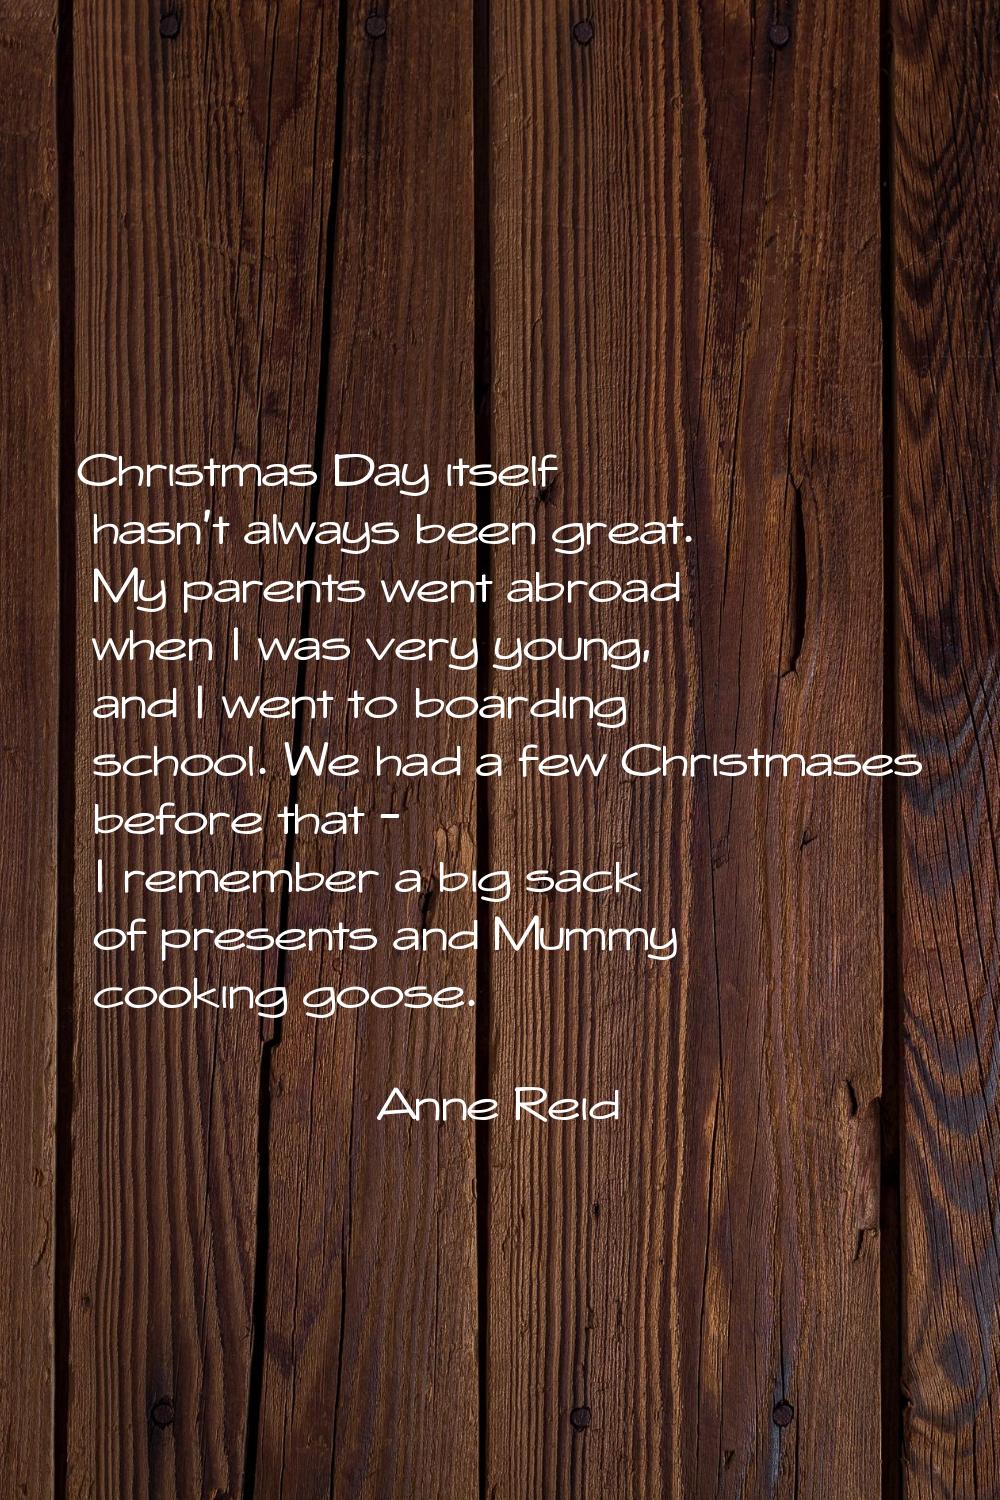 Christmas Day itself hasn't always been great. My parents went abroad when I was very young, and I 